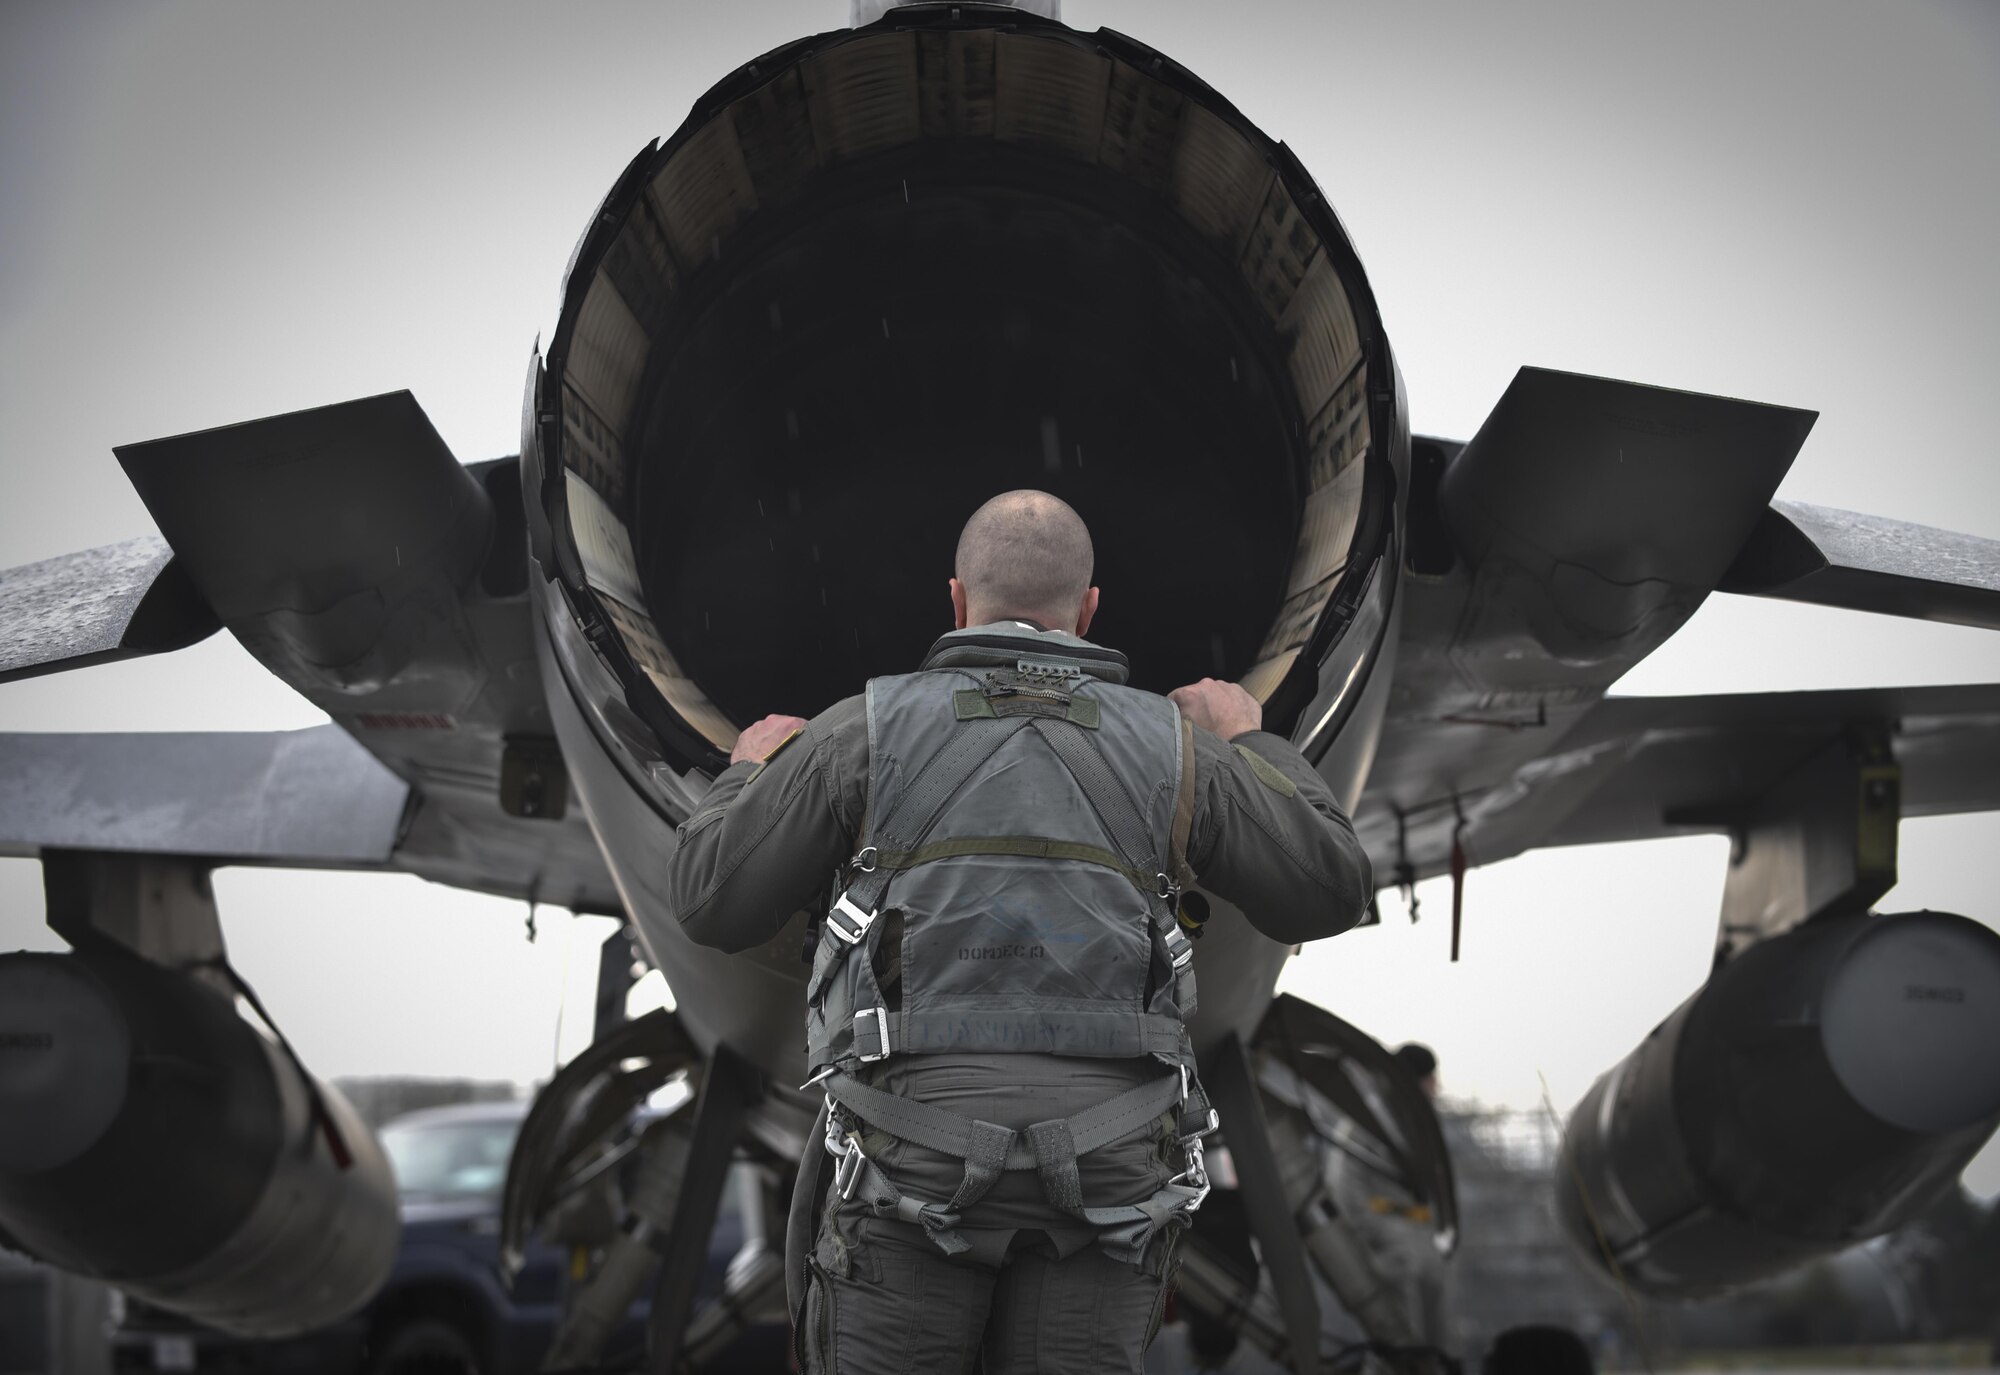 Lt. Col. Matthew Kenkel, the 14th Fighter Squadron director of operations inspects the exhaust nozzle and augmenter area of an F-16 Fighting Falcon prior to the start of of a bilateral exercise at Misawa Air Base Japan, April 19, 2017. The regularly scheduled exercise has been planned for several months. It is another key opportunity for the Air Force and Japan Air Self- Defense Forces to practice combat capabilities together. (U.S. Air Force photo by Staff Sgt. Melanie A. Hutto)